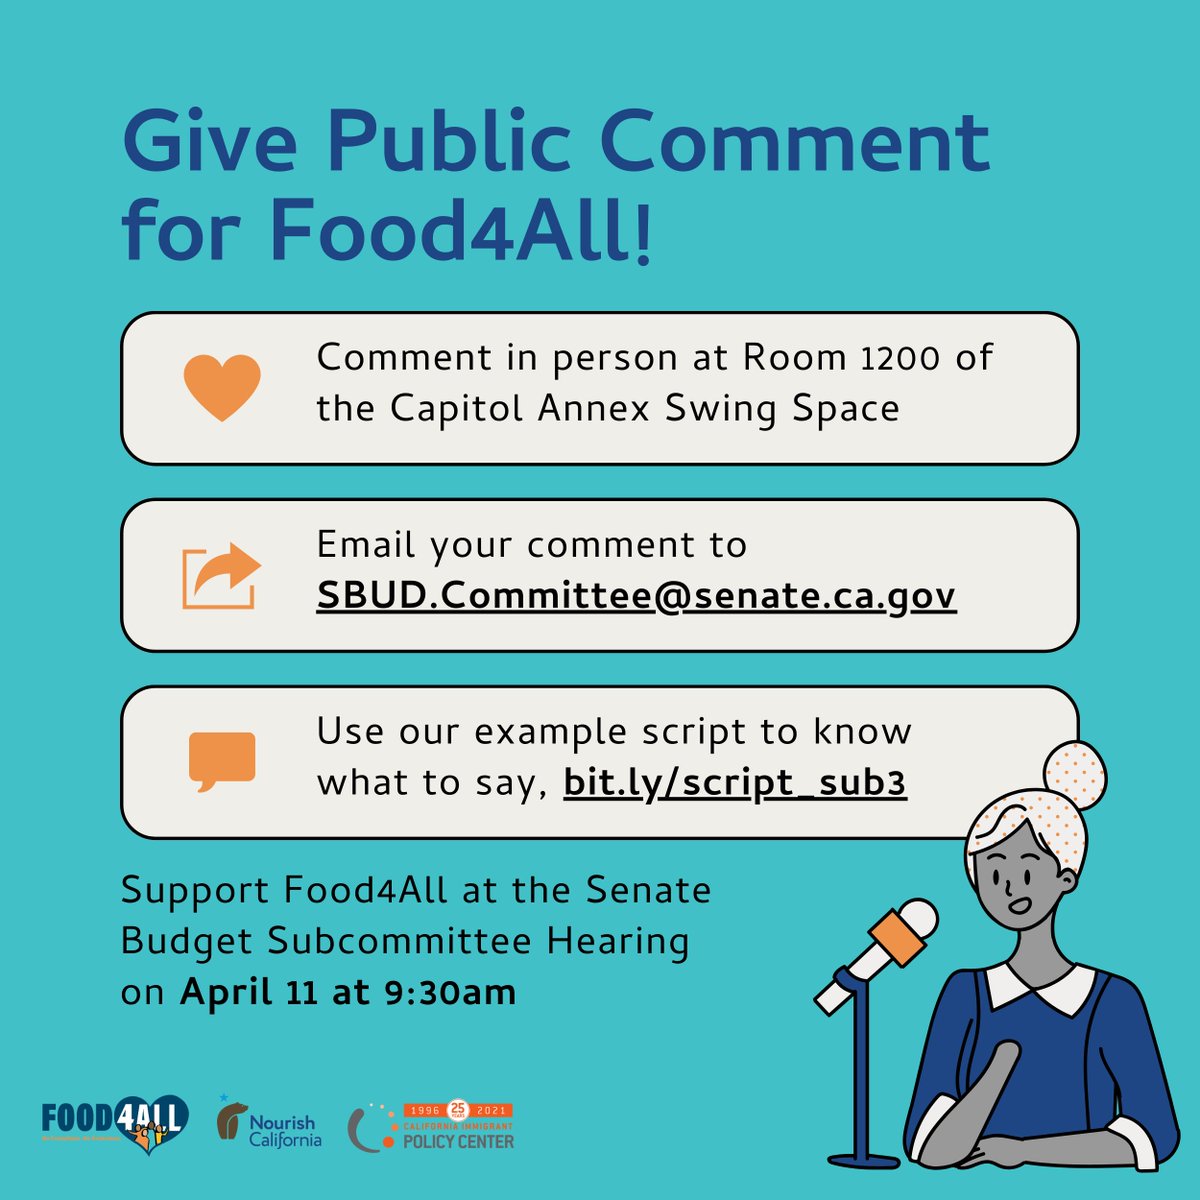 2 out of 3 undocumented children = affected by #FoodInsecurity, yet are excluded from our food safety net. Support #Food4All by giving public comment at the Senate hearing on 4/11! Use our script in person or over email - bit.ly/script_sub3 #NoExceptionsNoExclusions #NoDelay